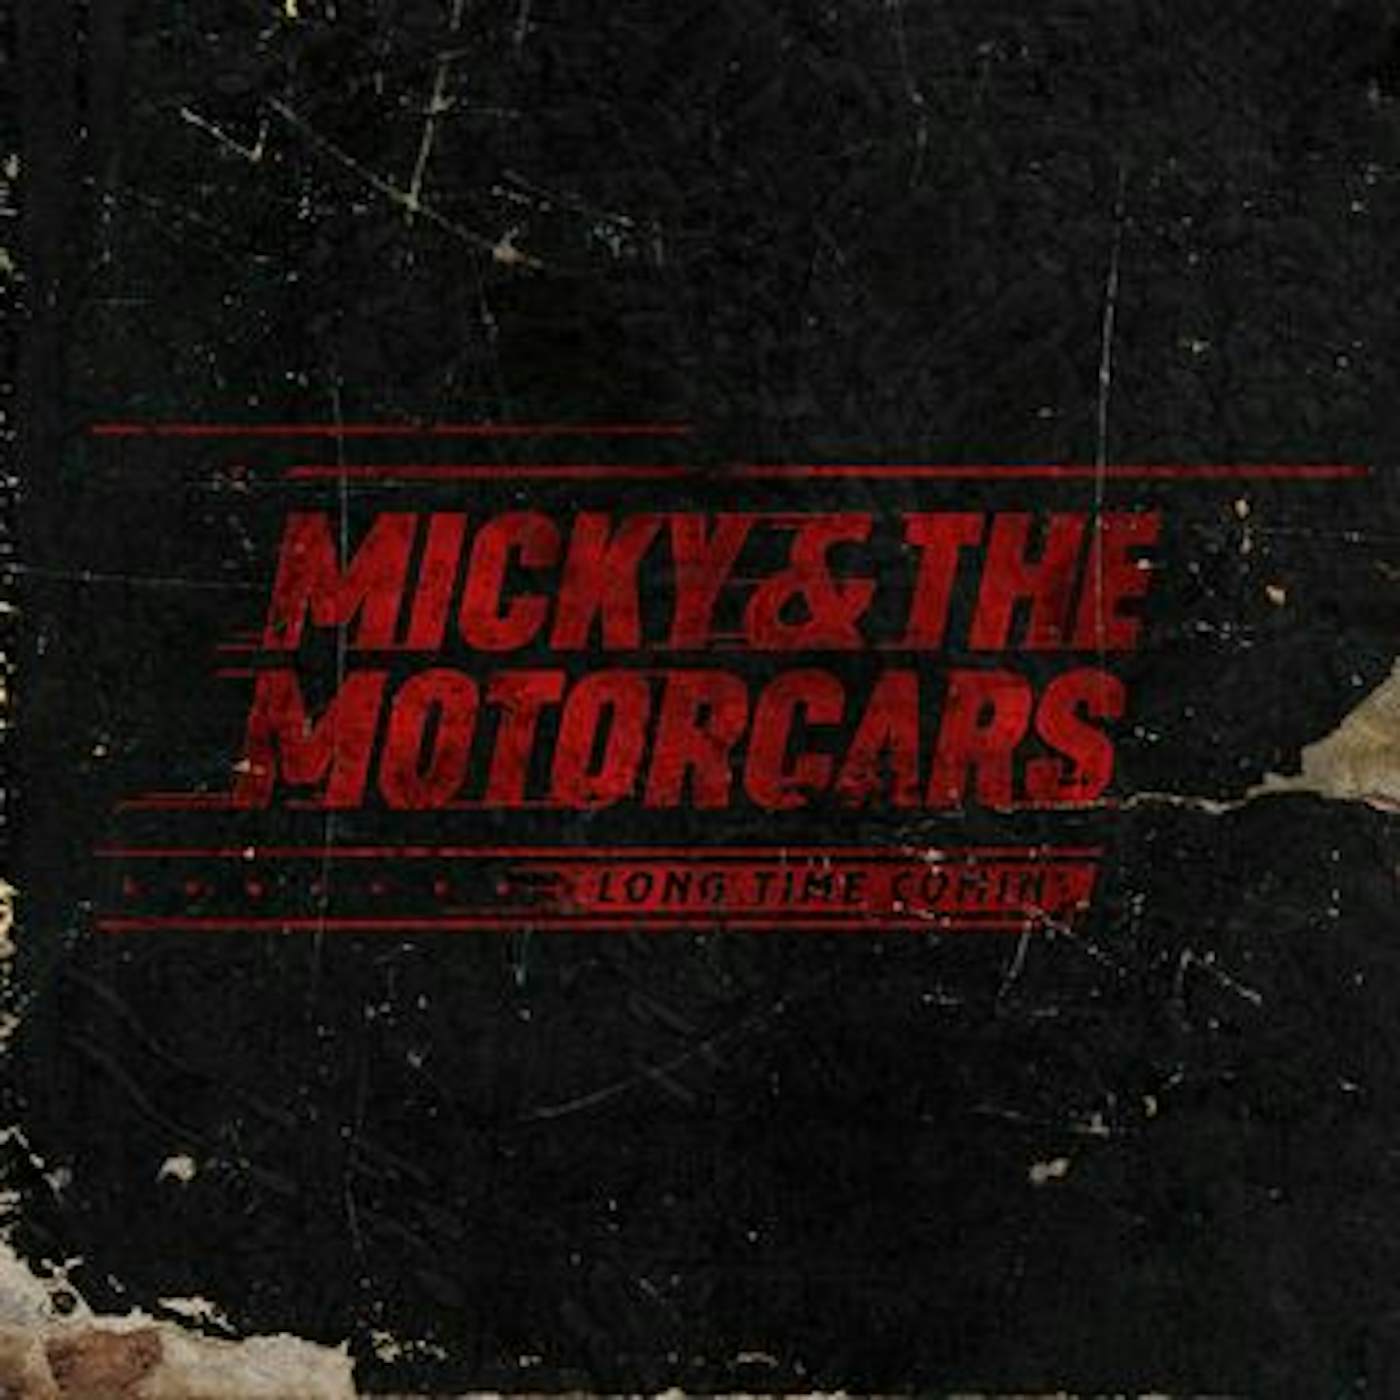 Micky & The Motorcars LONG TIME COMIN' CD